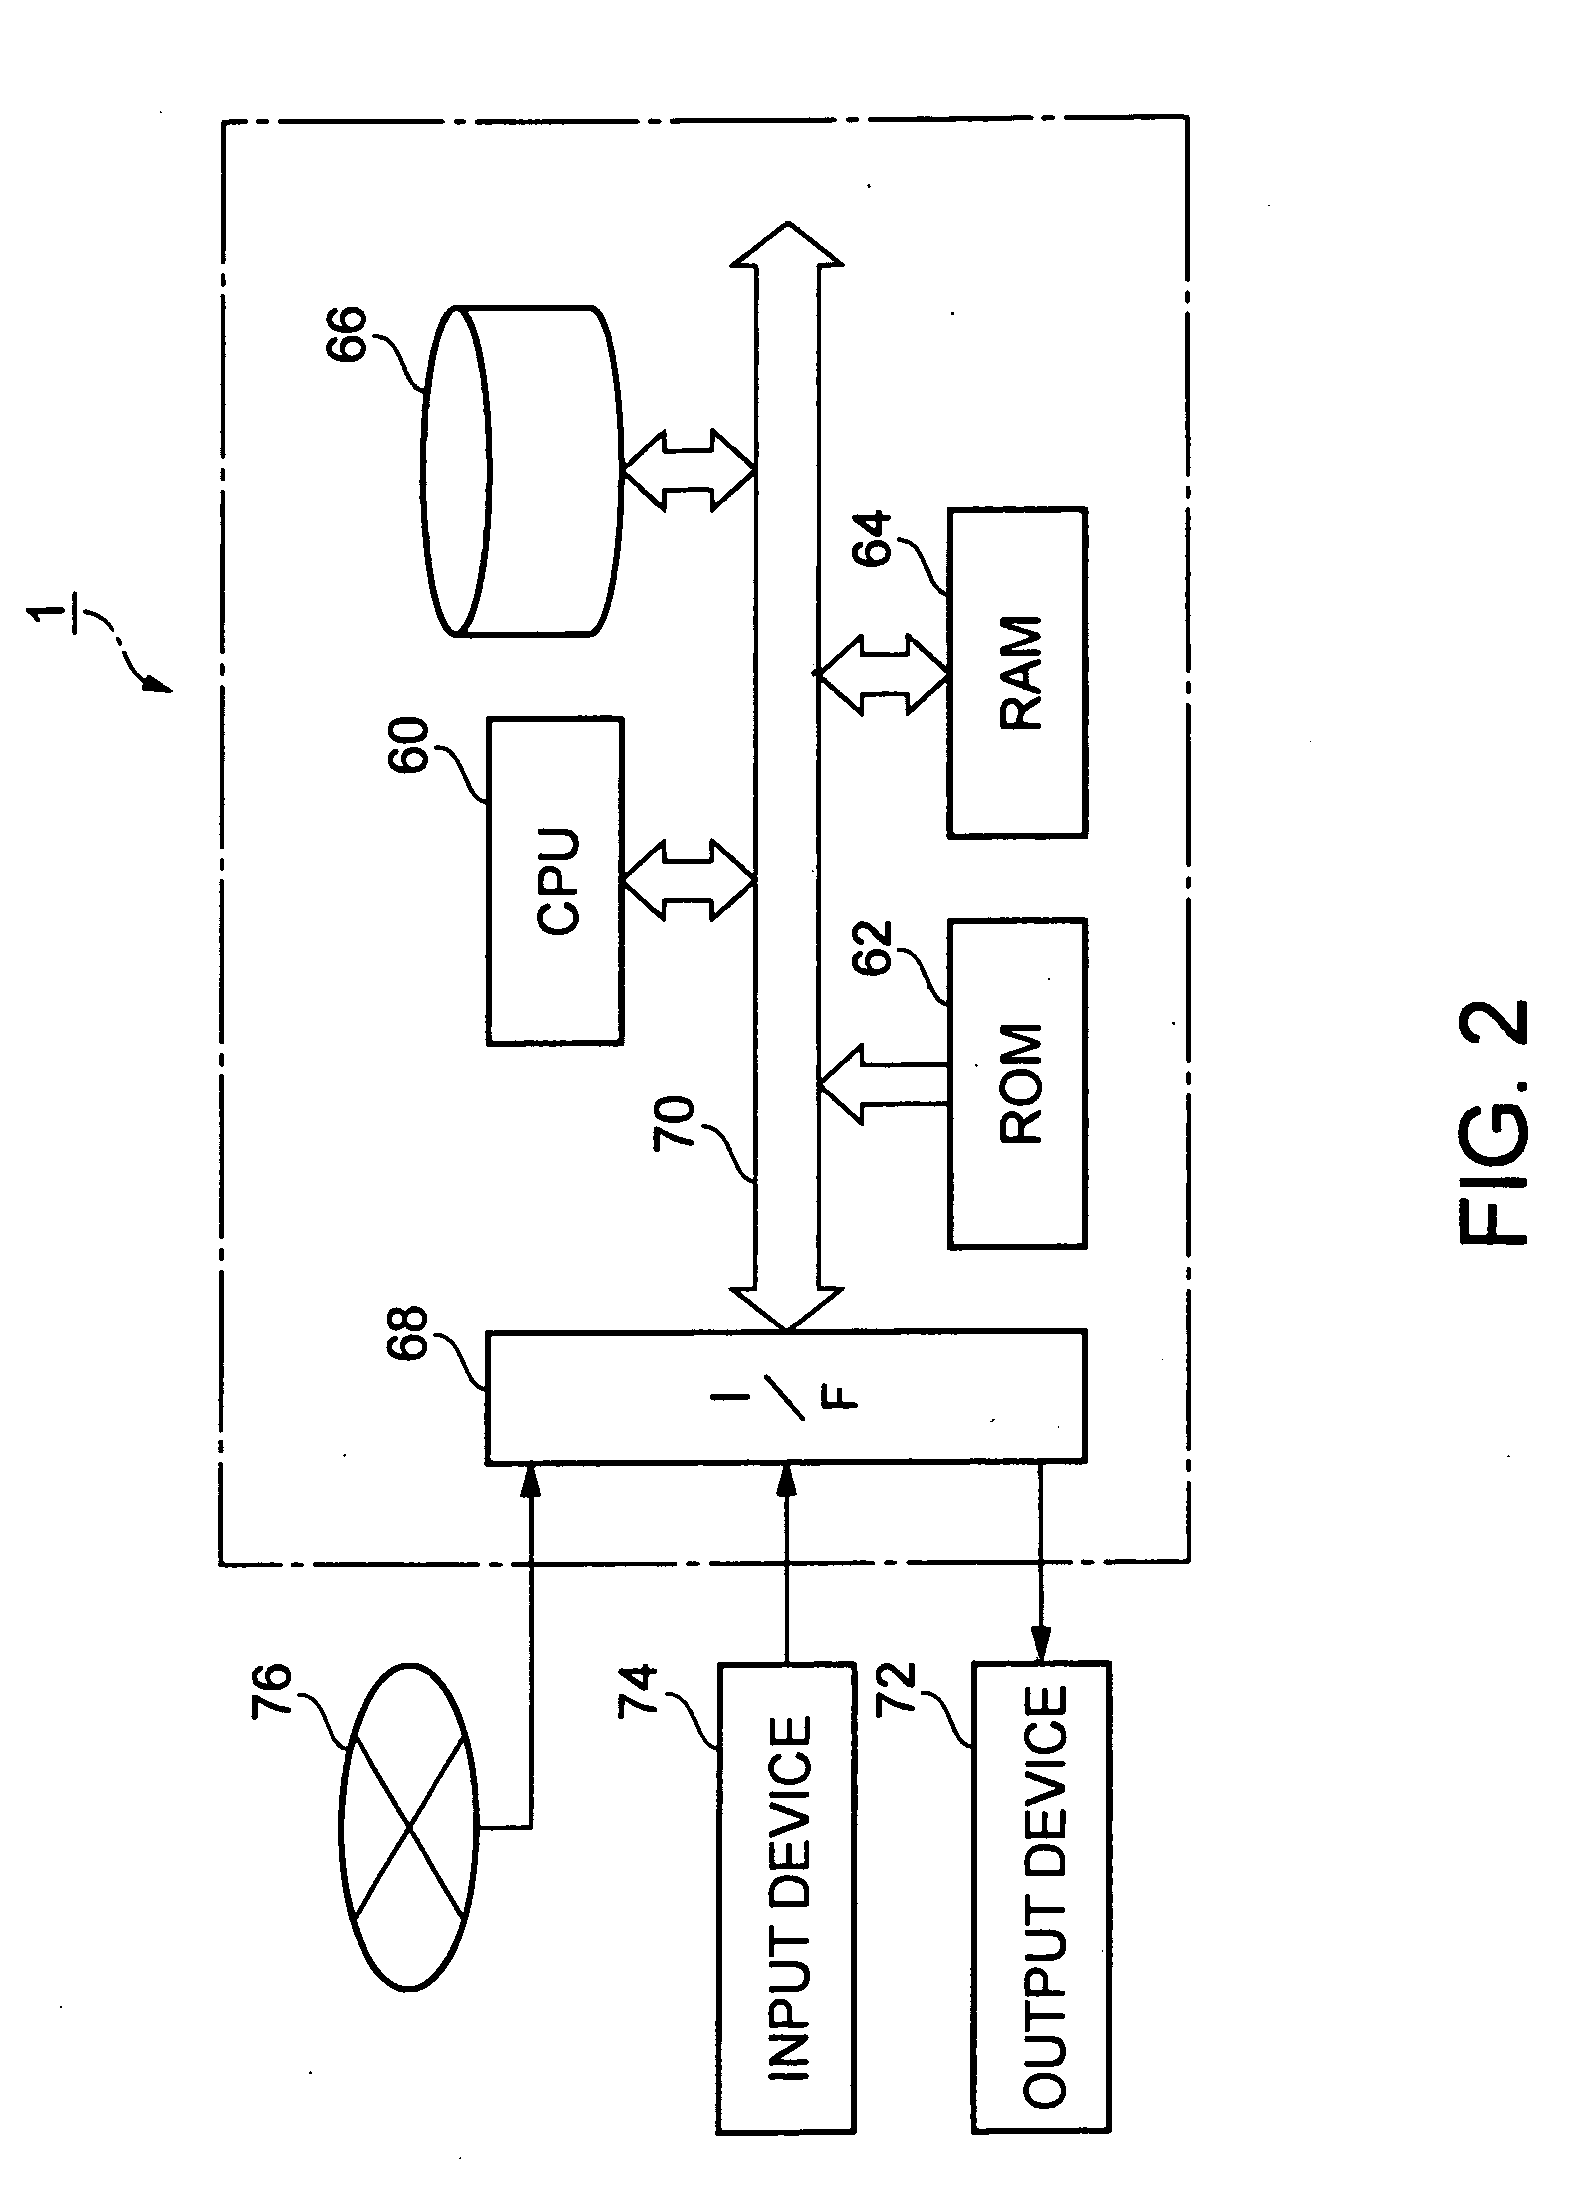 Object image detecting apparatus, face image detecting program and face image detecting method